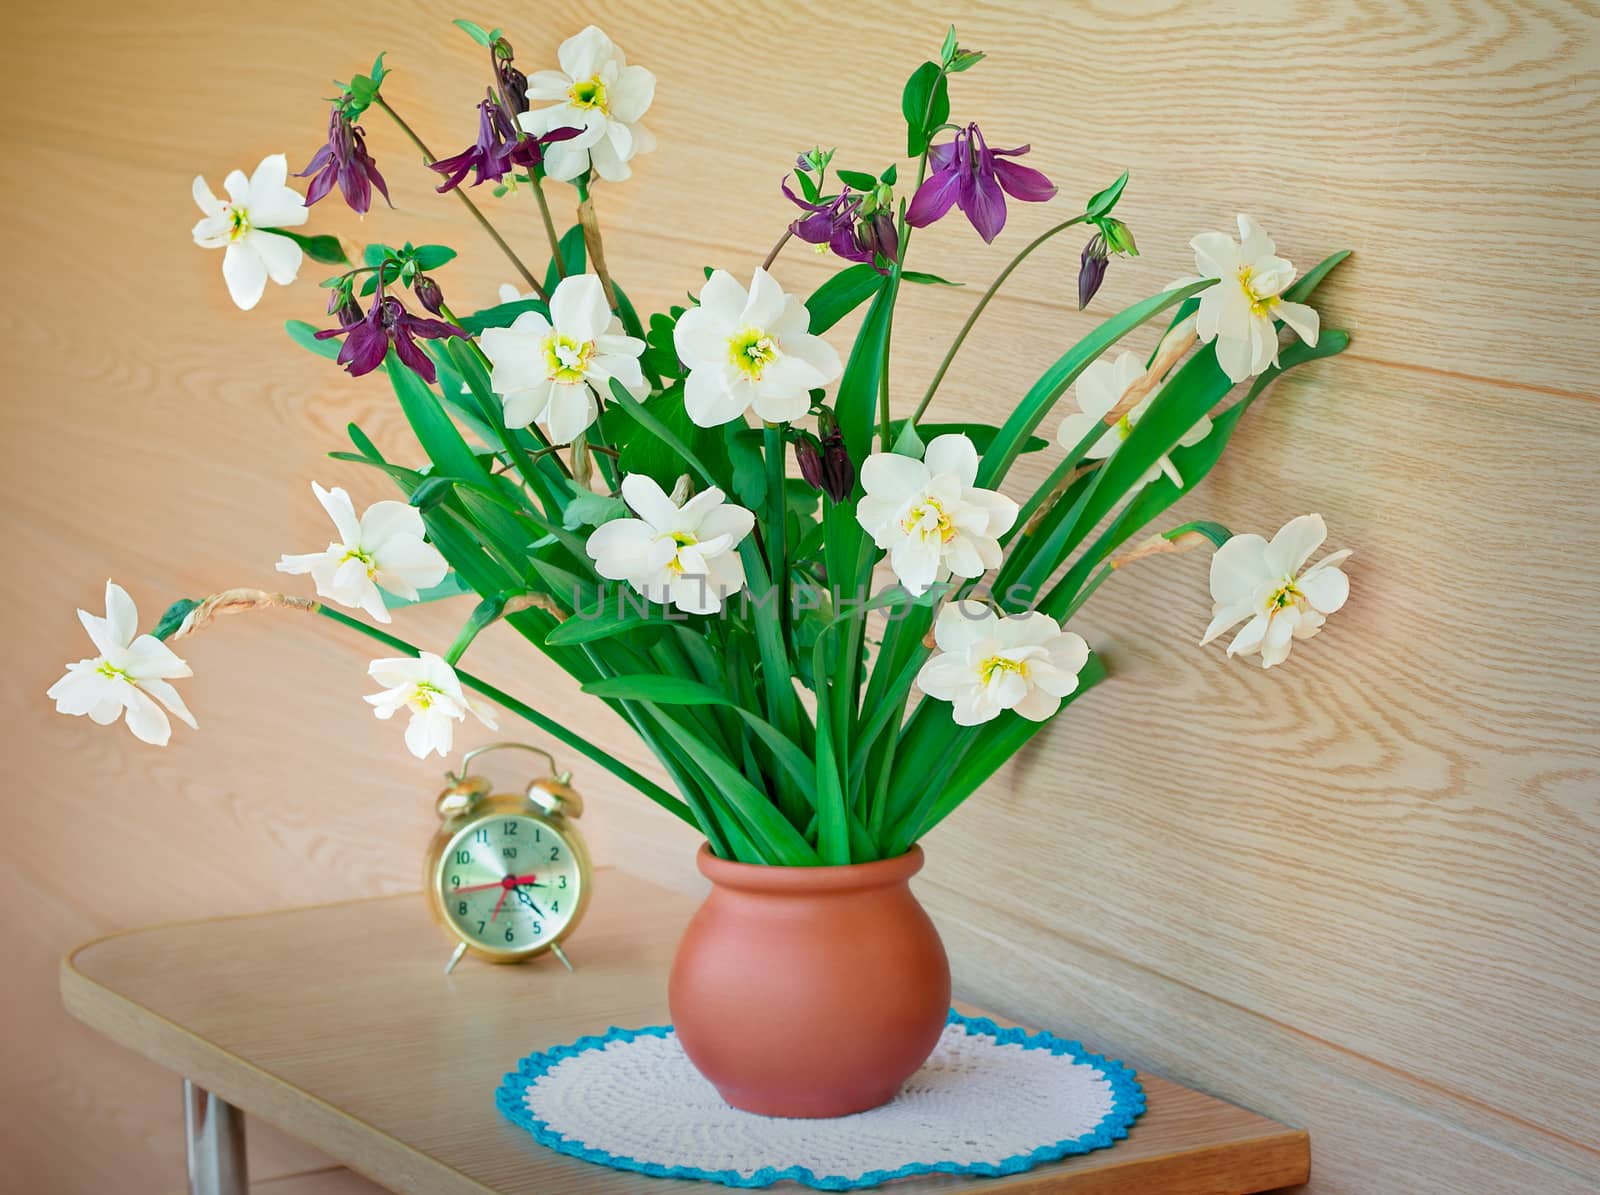 Blossoming narcissuses in a vase on a table. by georgina198